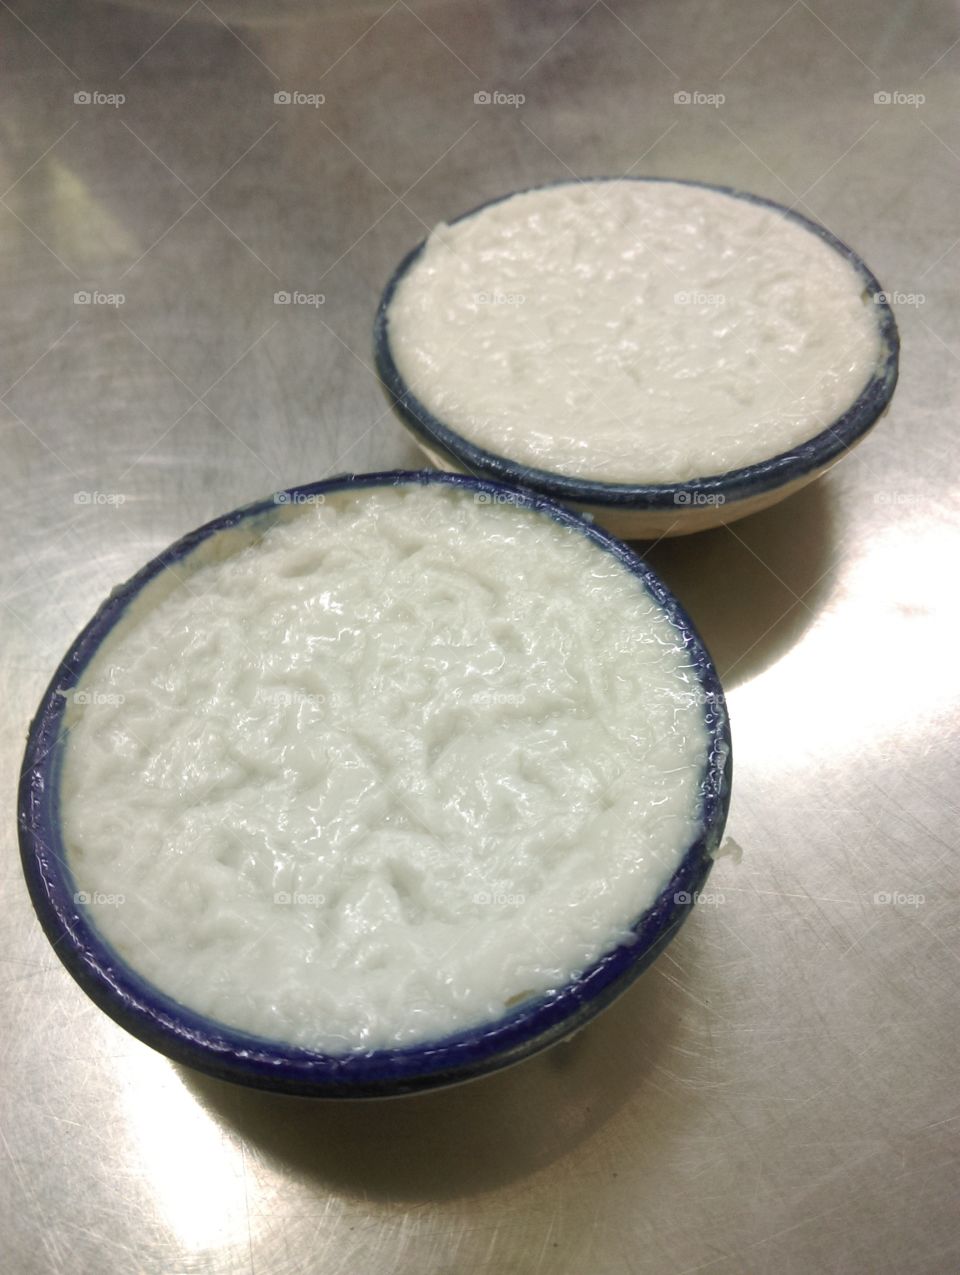 Coconut milk custard in small porcelain, 'Kanomtuay' Thai desert. Thai traditional desert we called Kanomtuay.Kanomtuay made from rice powder and coconut milk.Sweet tasted and yummy.